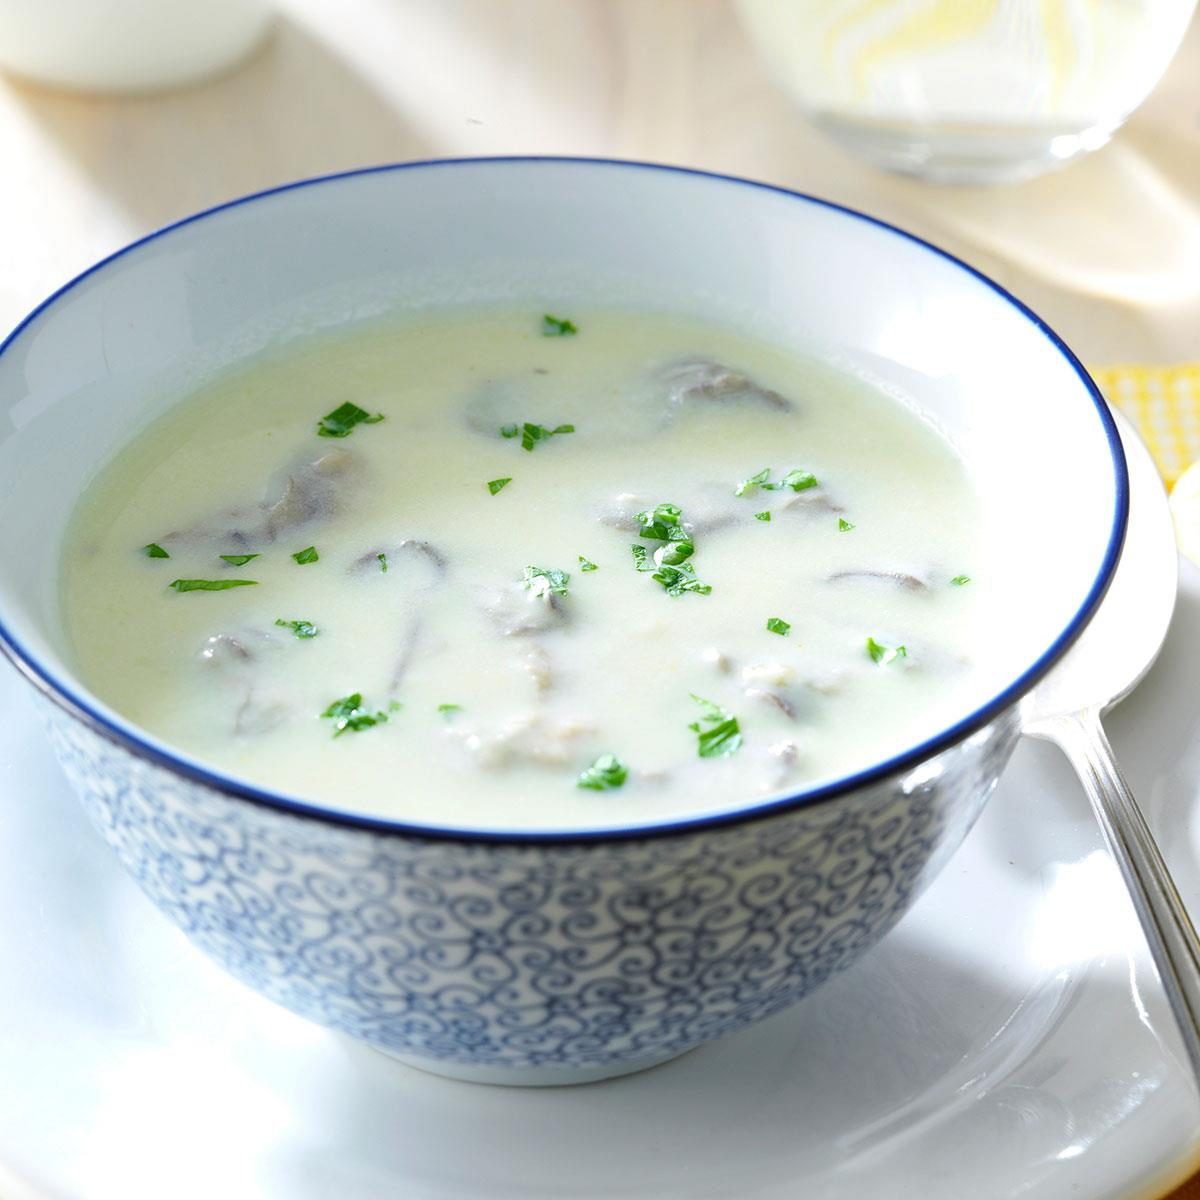 New Year's Oyster Stew Recipe: How to Make It